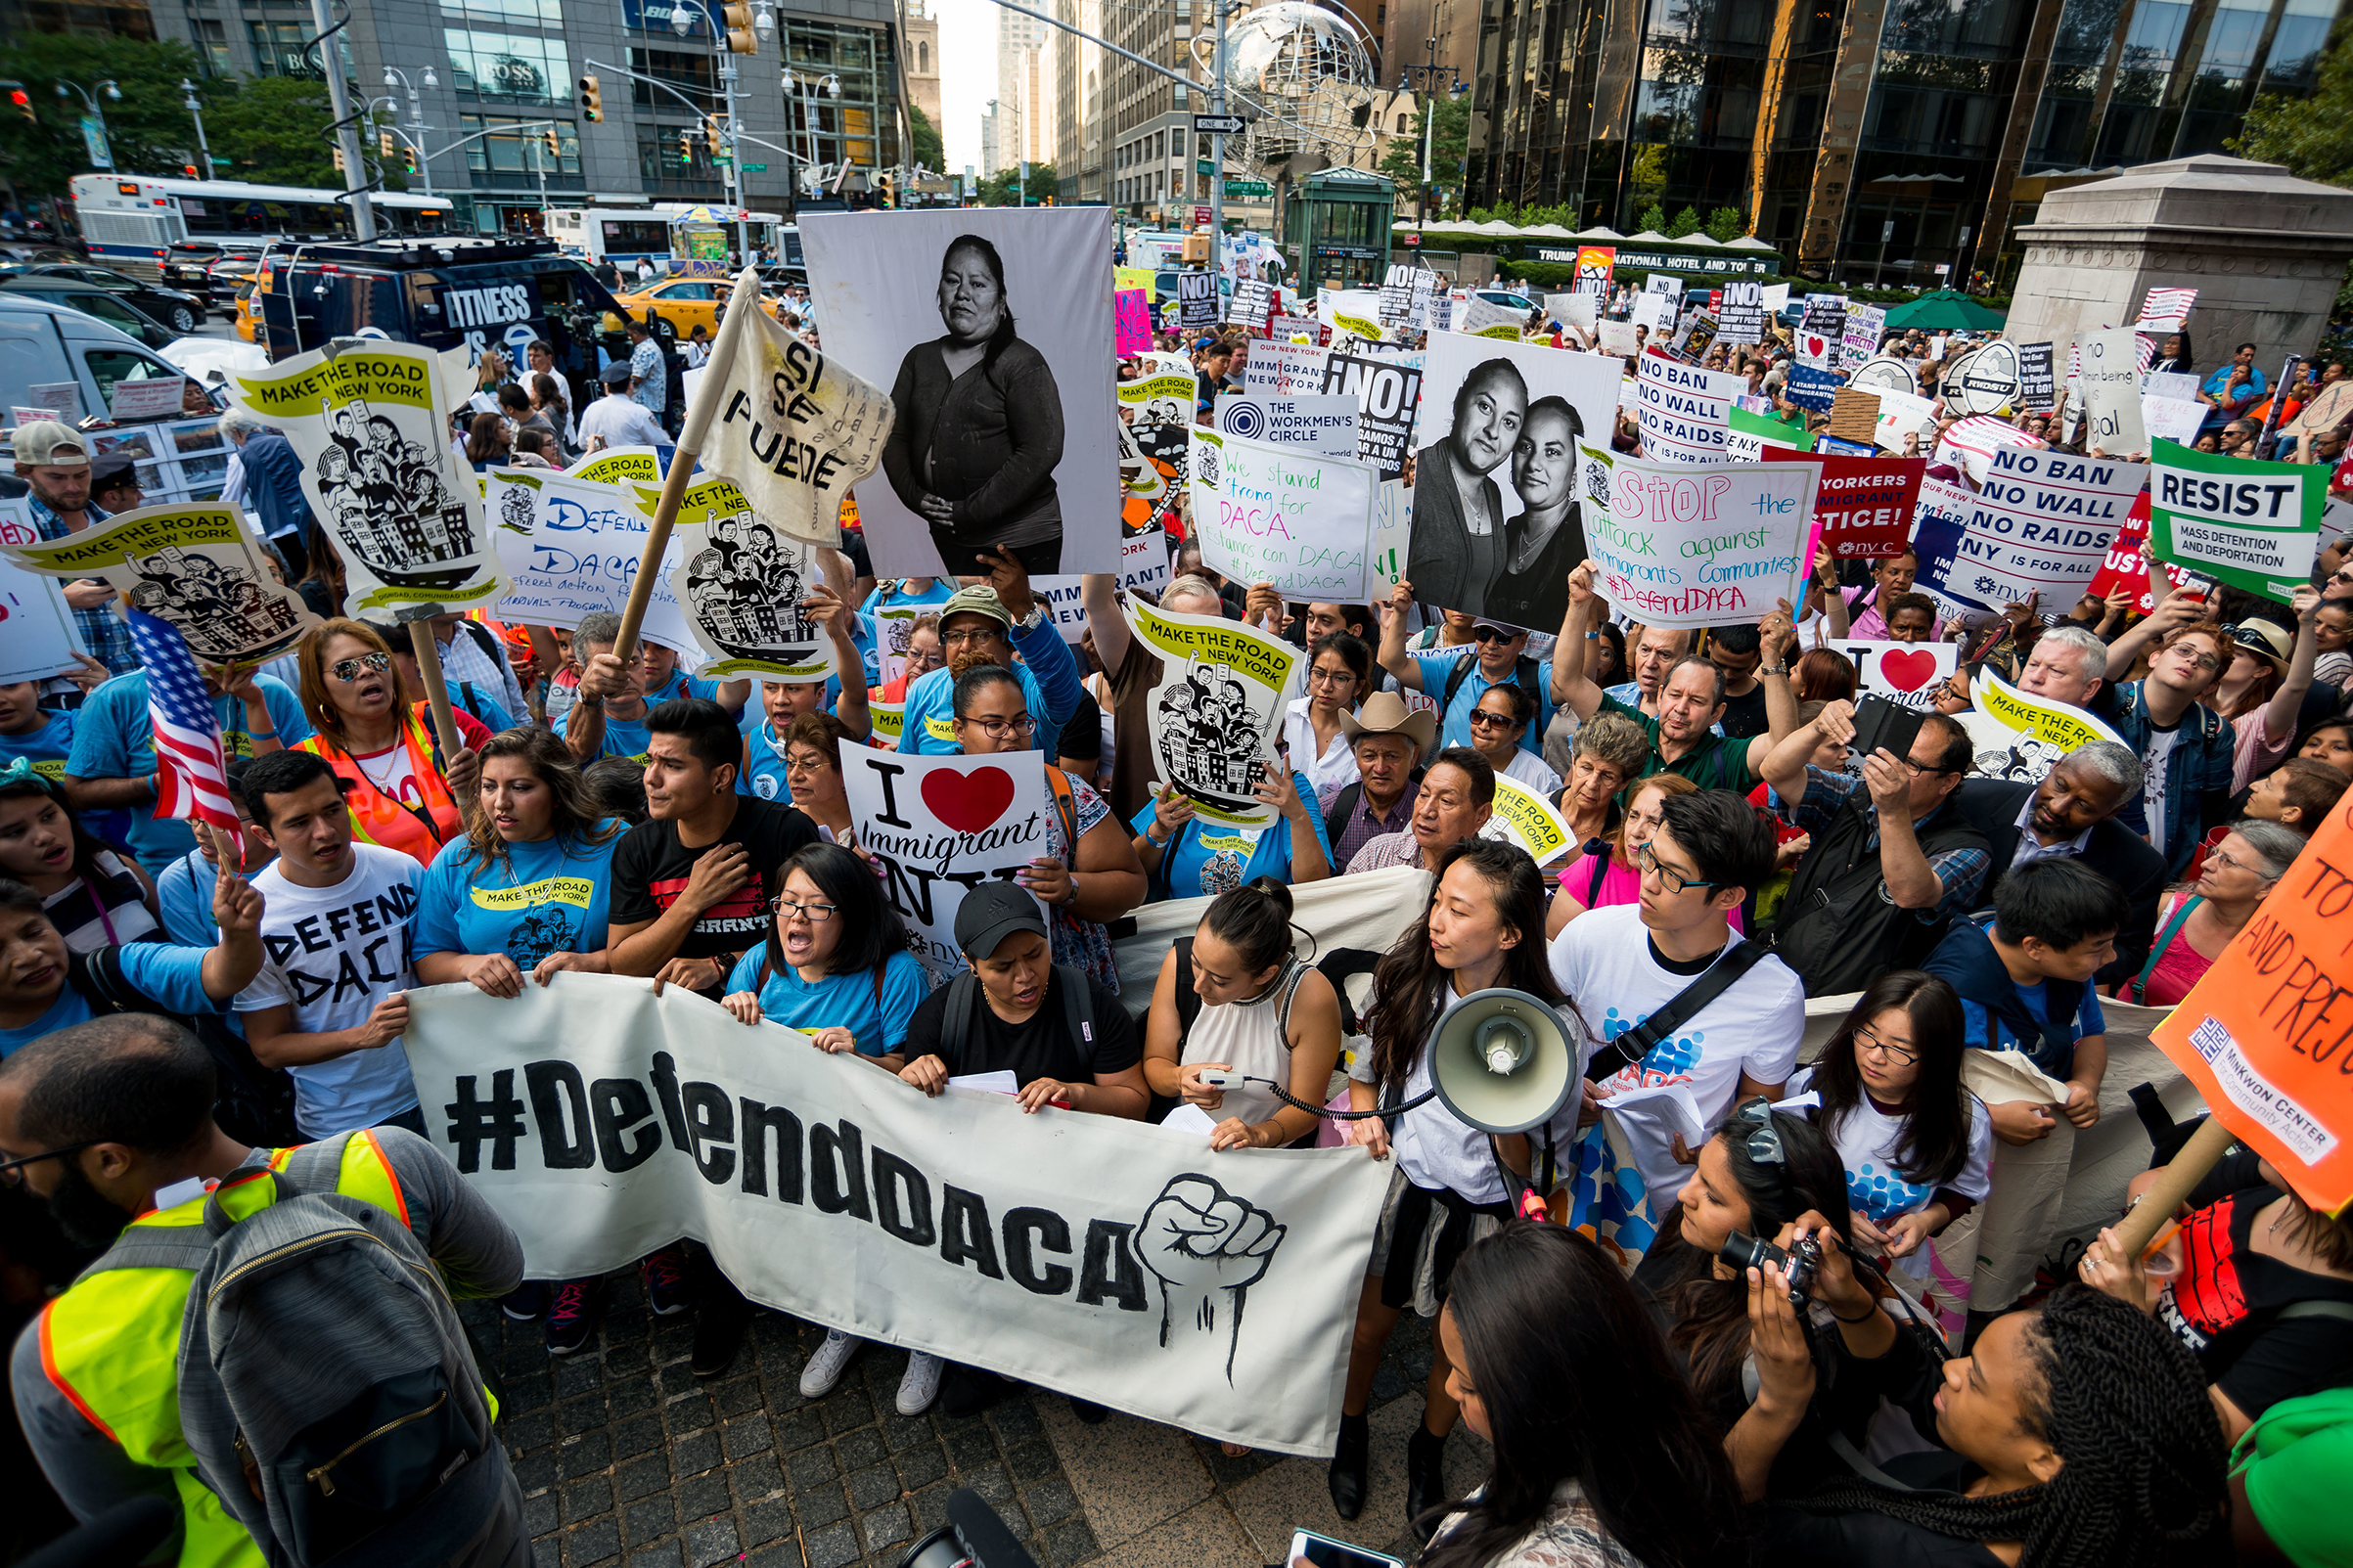 Activists rally in Columbus Circle and marched to Trump Tower in protest of President Donald Trump's possible elimination of the Obama-era "Deferred Action for Childhood Arrivals." (Albin Lohr-Jones—Pacific Press/LightRocket/Getty Images)